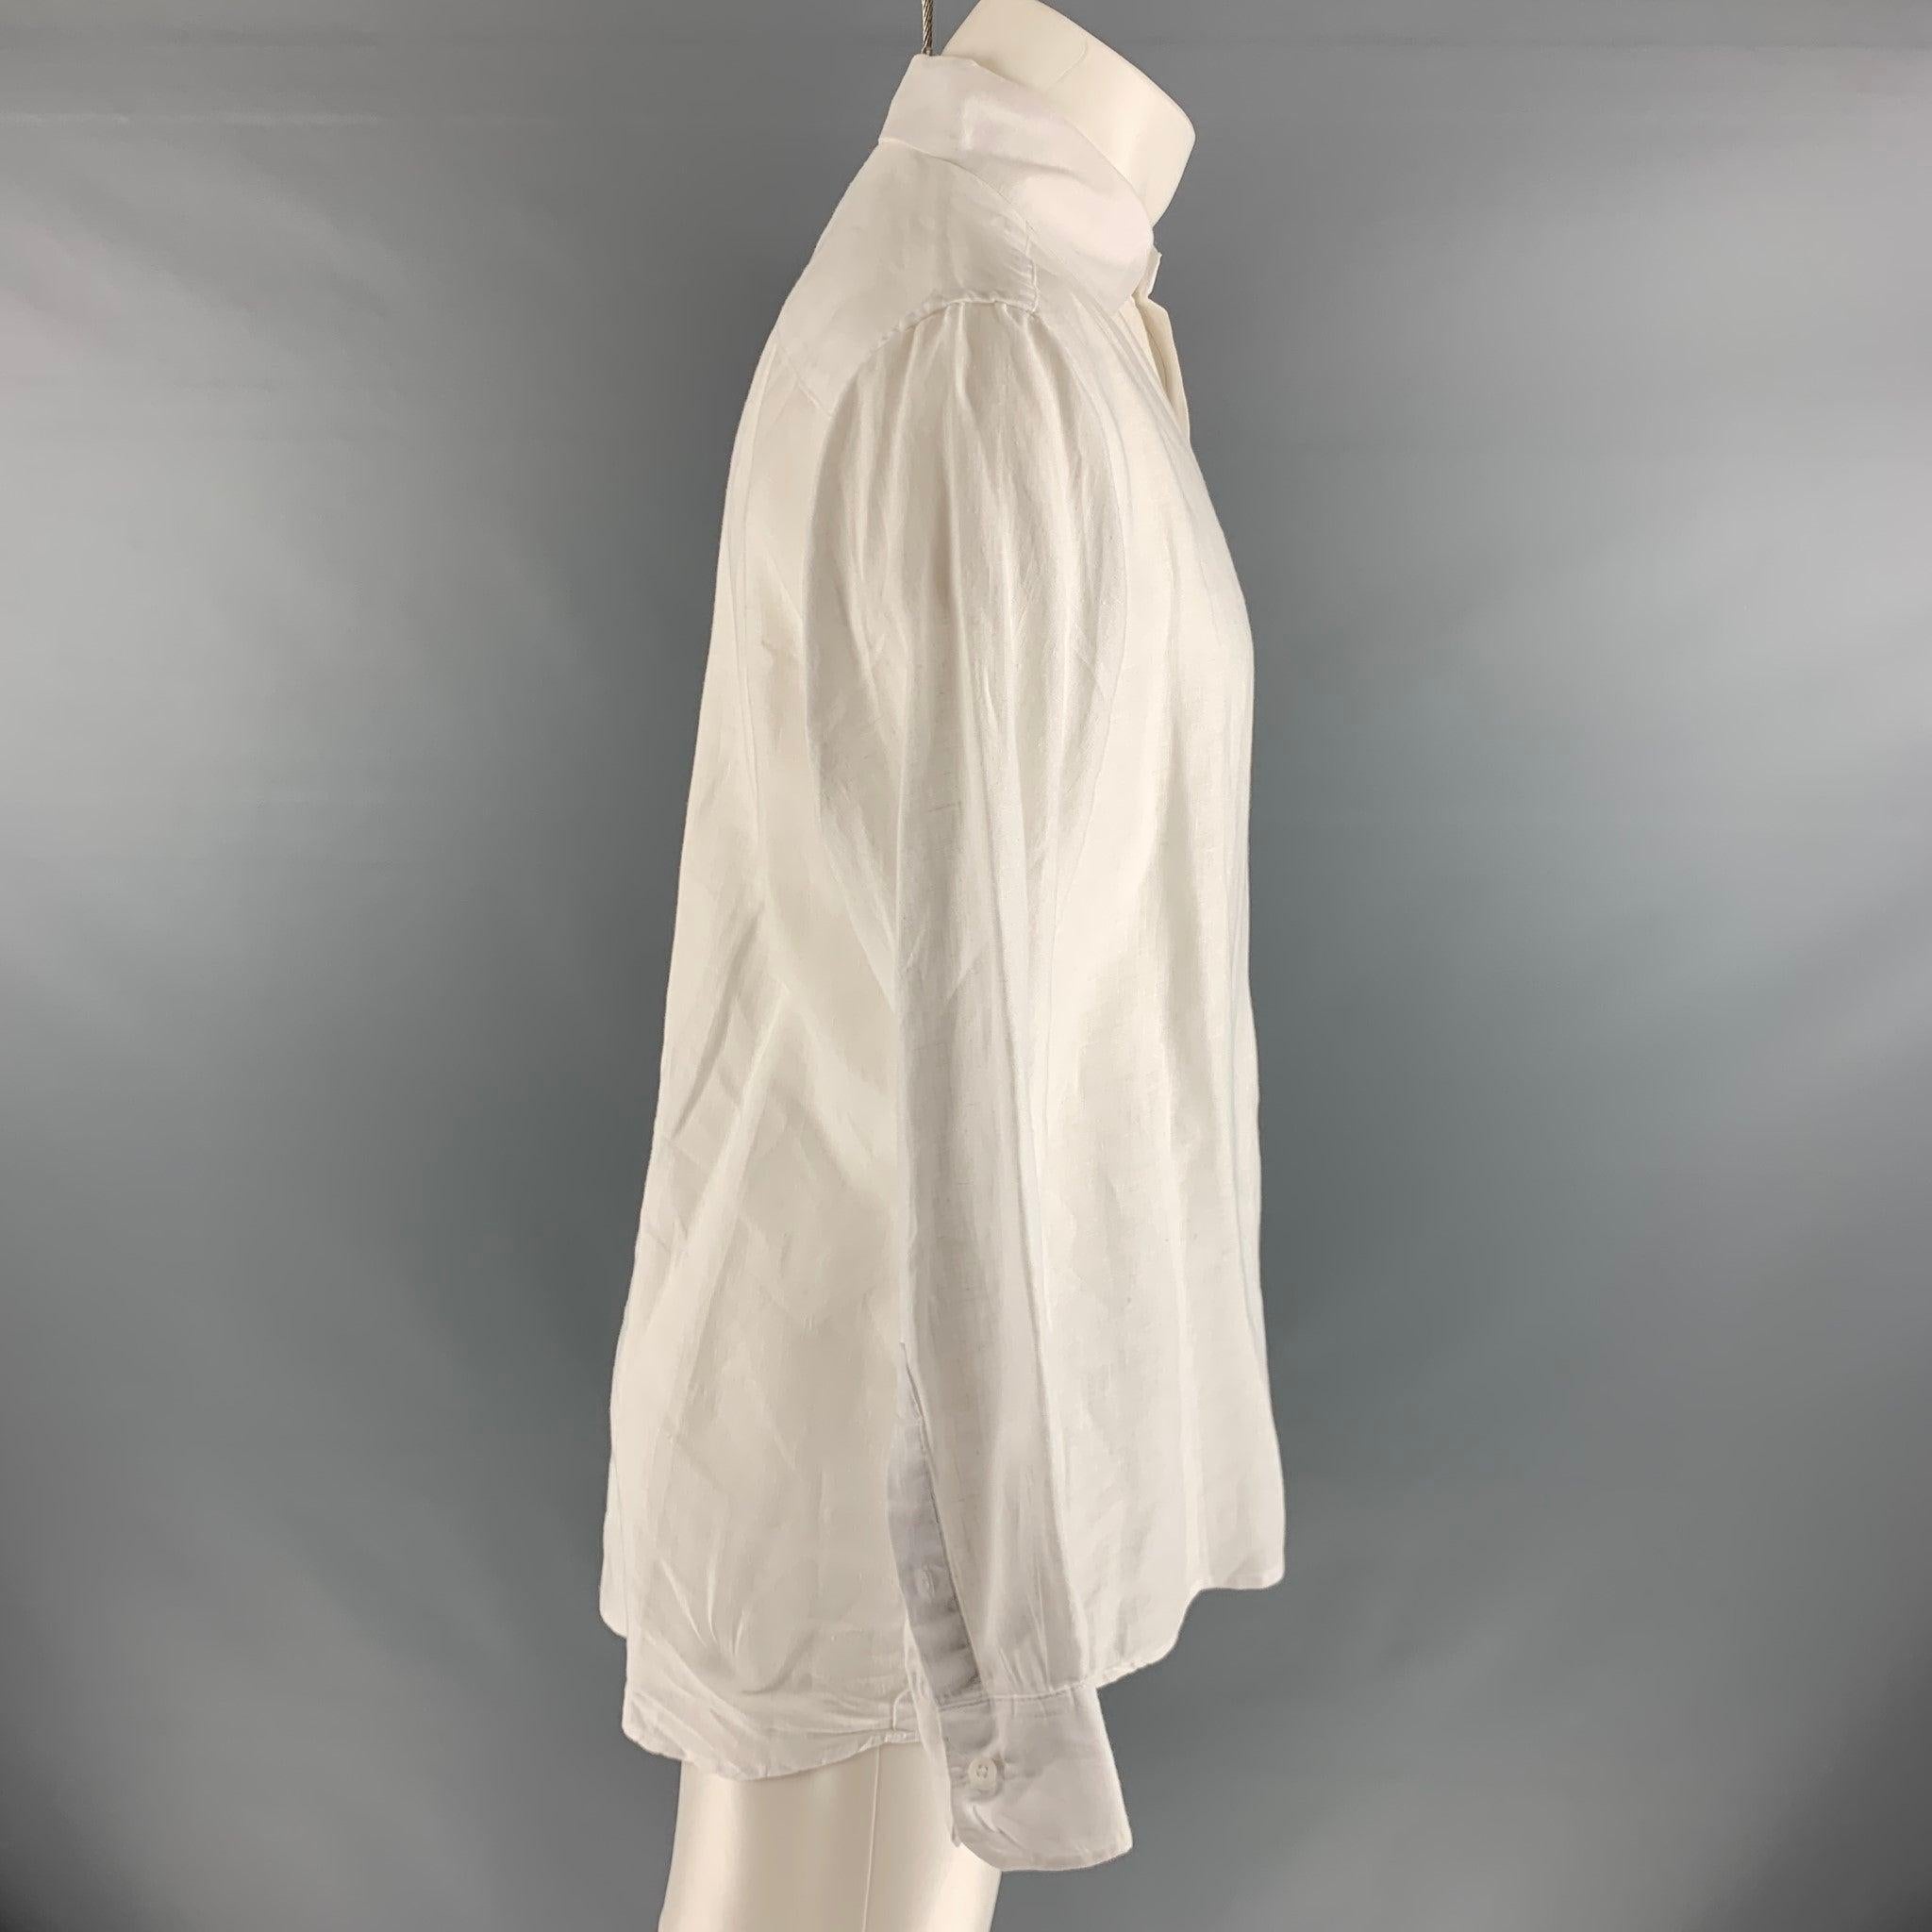 SAKS FIFTH AVENUE
long sleeve shirt comes in a 100% white linen, featuring a spread collar,button down closure, and a single pocket.Very Good Pre-Owned Condition. 

Marked:   S 

Measurements: 
 
Shoulder: 17 inches Chest: 42 inches Sleeve: 24